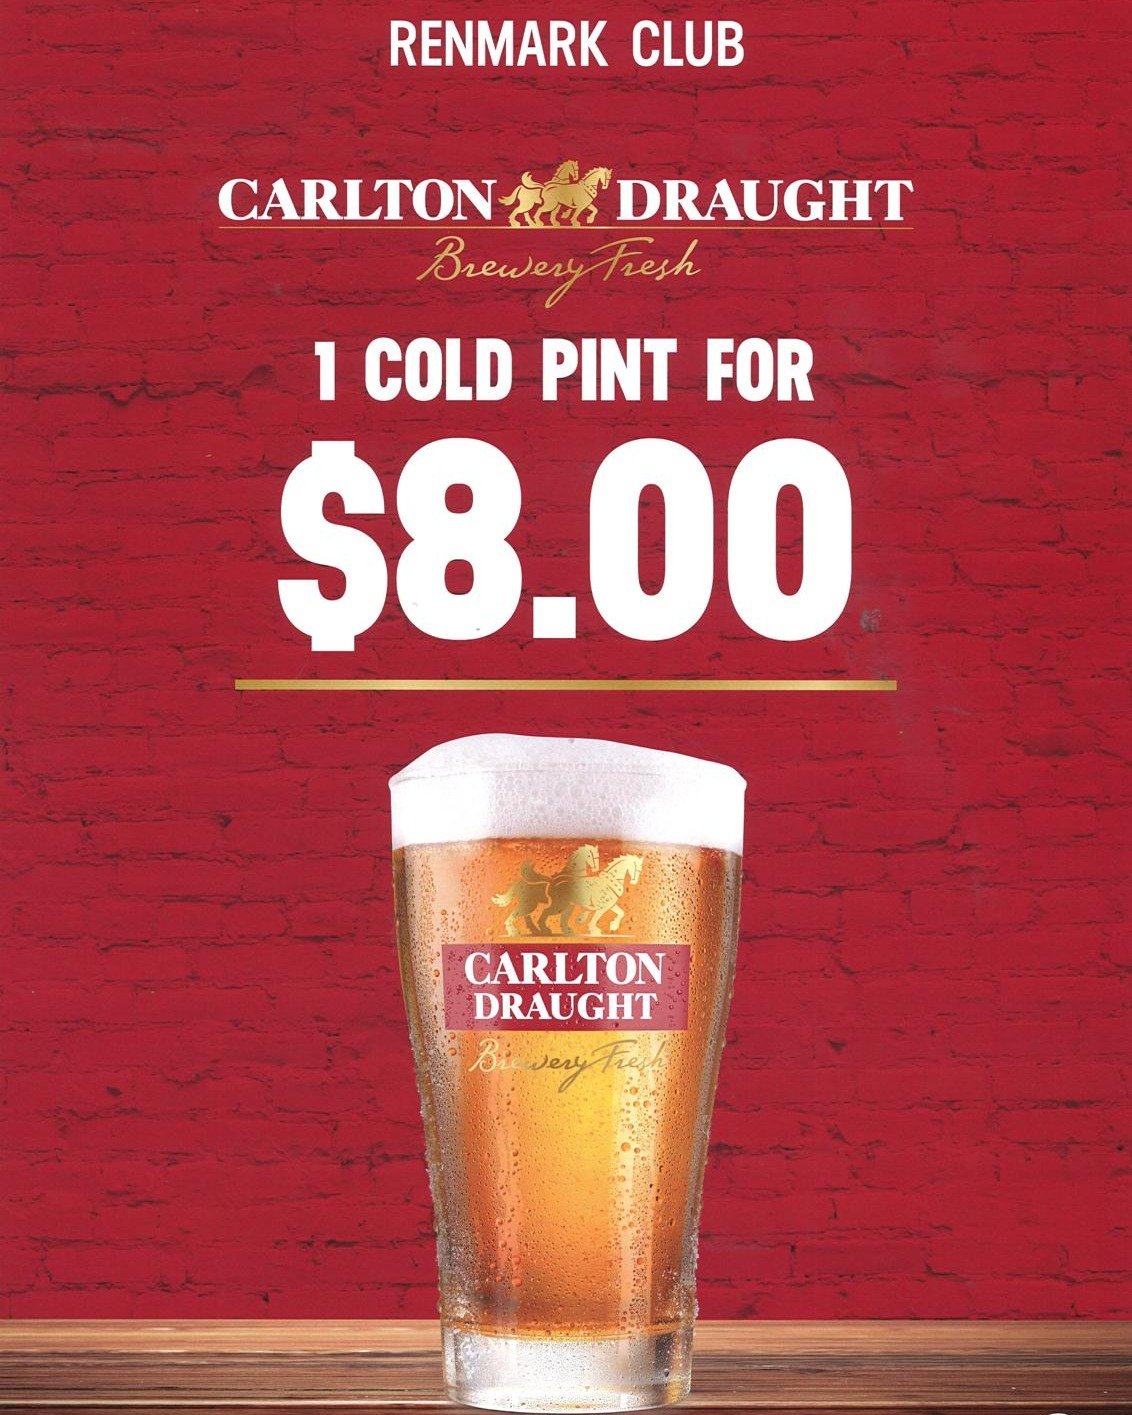 Get your hands on our Beer of the Month: Carlton Draught Pint for just $8! 🍺❄️ Limited time only, so grab yours now and drink responsibly.
.
.
#rsalawsapply #drinkresponsibly #beerofthemonth #BOM #carltondraught #riverland #renmarkclocals #riverland